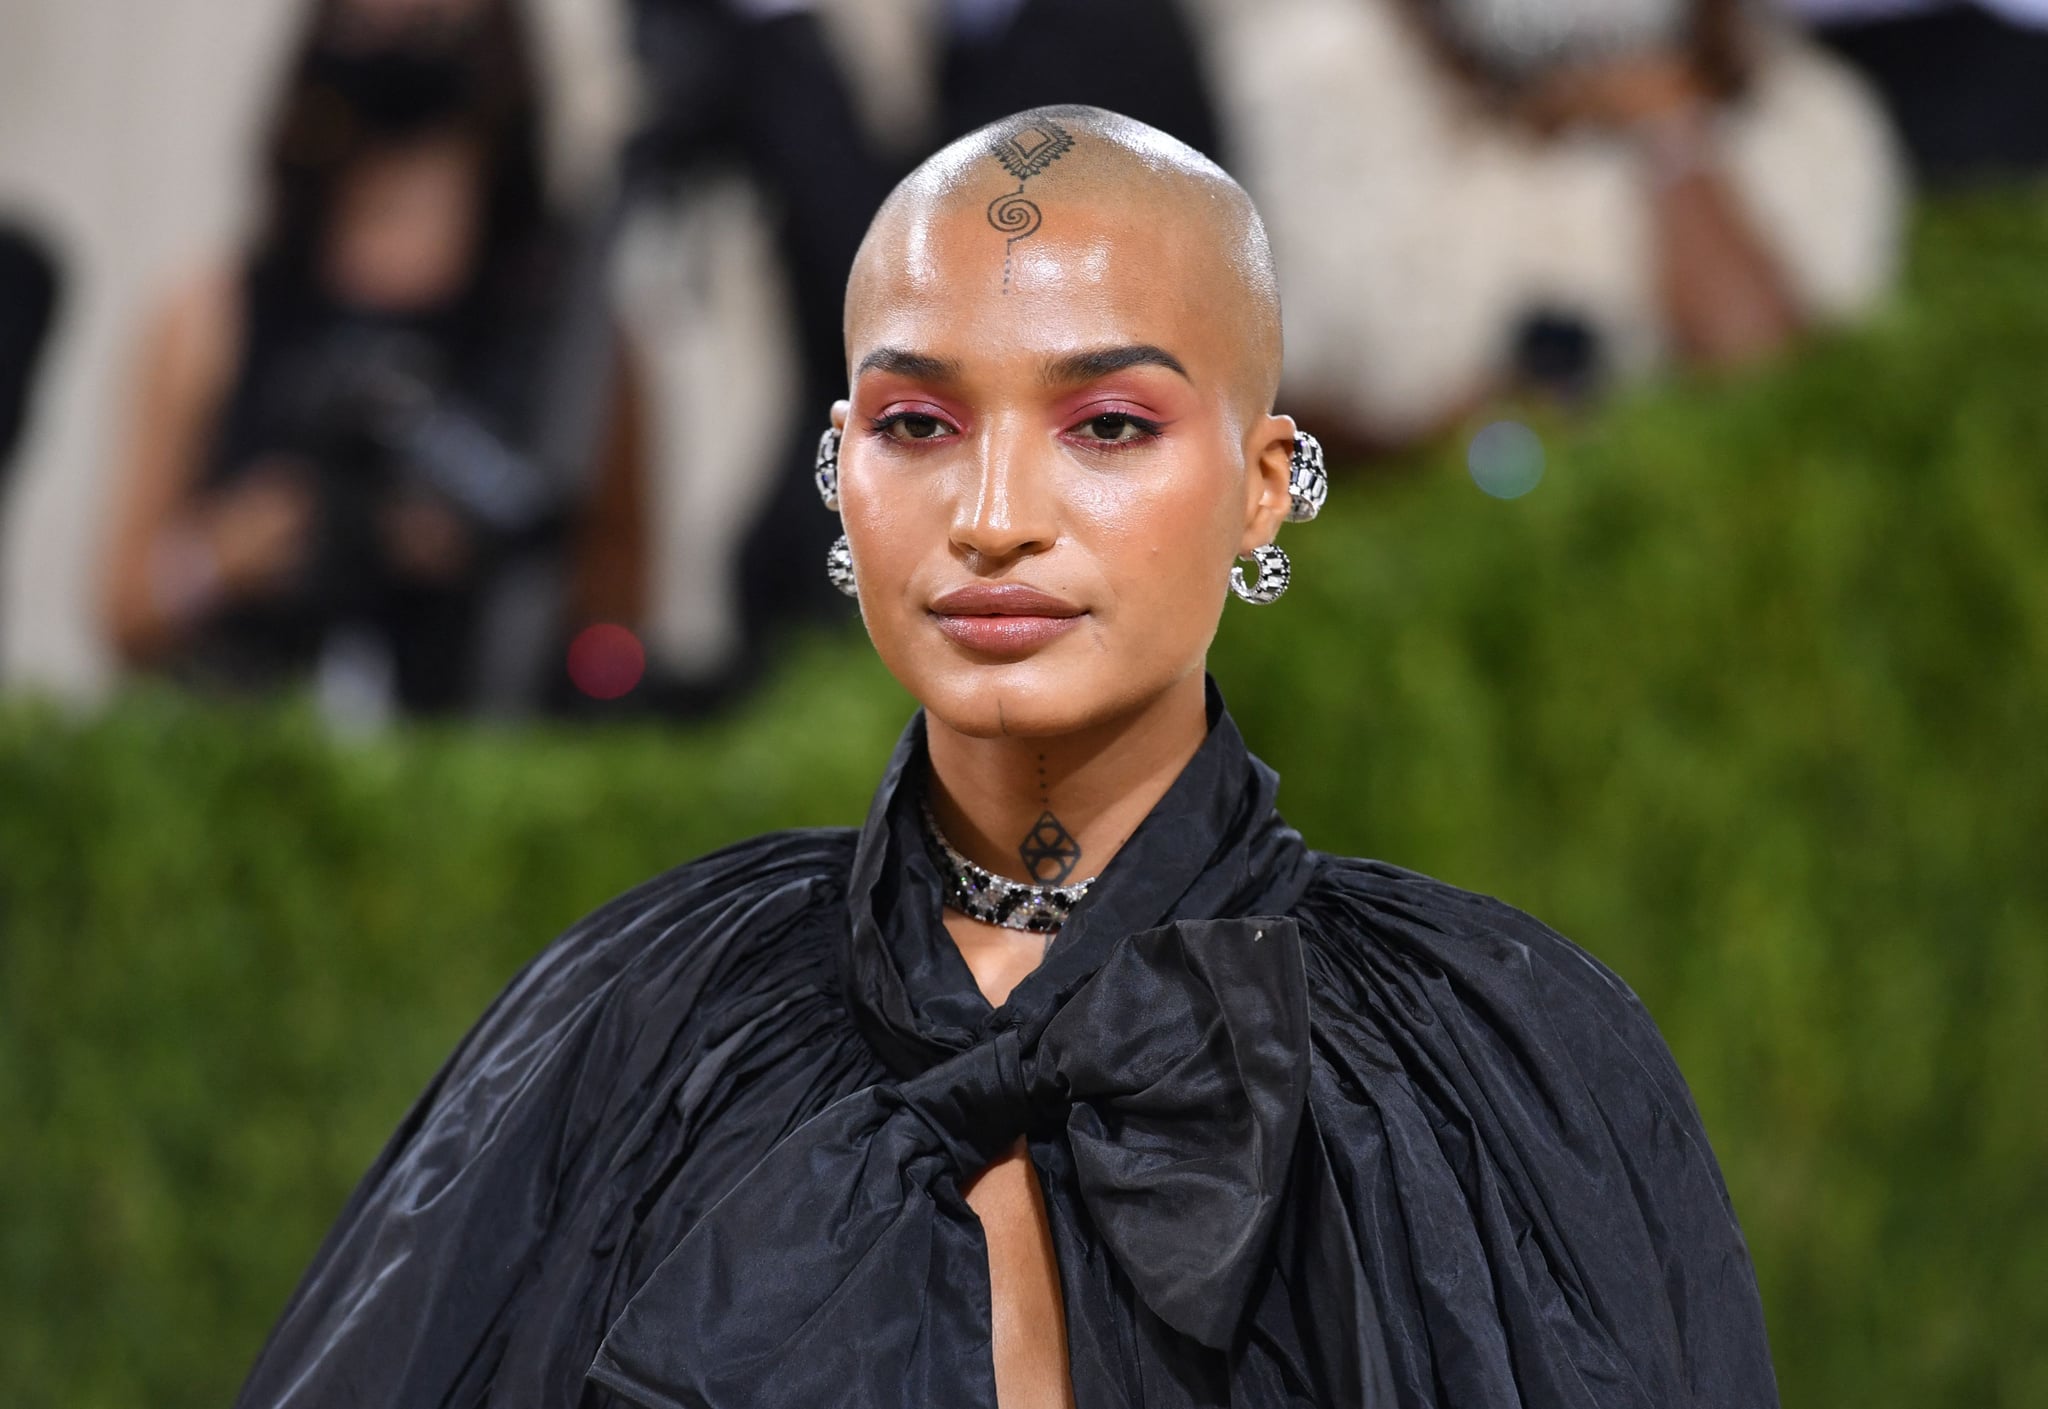 US actress  Indya Moore arrives for the 2021 Met Gala at the Metropolitan Museum of Art on September 13, 2021 in New York. - This year's Met Gala has a distinctively youthful imprint, hosted by singer Billie Eilish, actor Timothee Chalamet, poet Amanda Gorman and tennis star Naomi Osaka, none of them older than 25. The 2021 theme is 